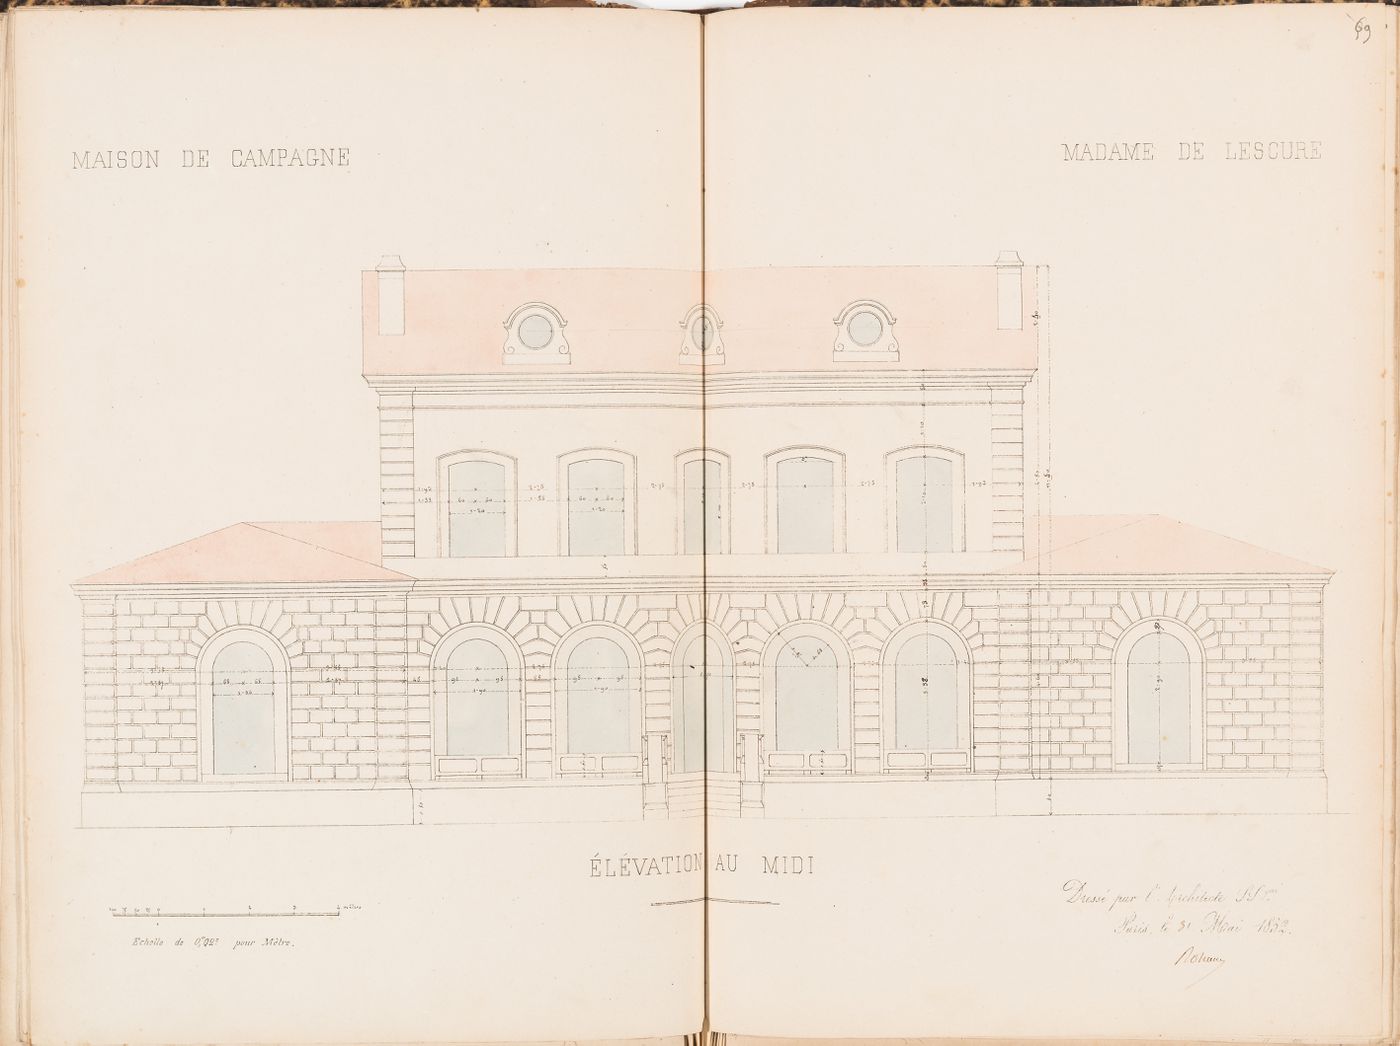 Elevation for the principal façade for a country house for Madame de Lescure, Royan